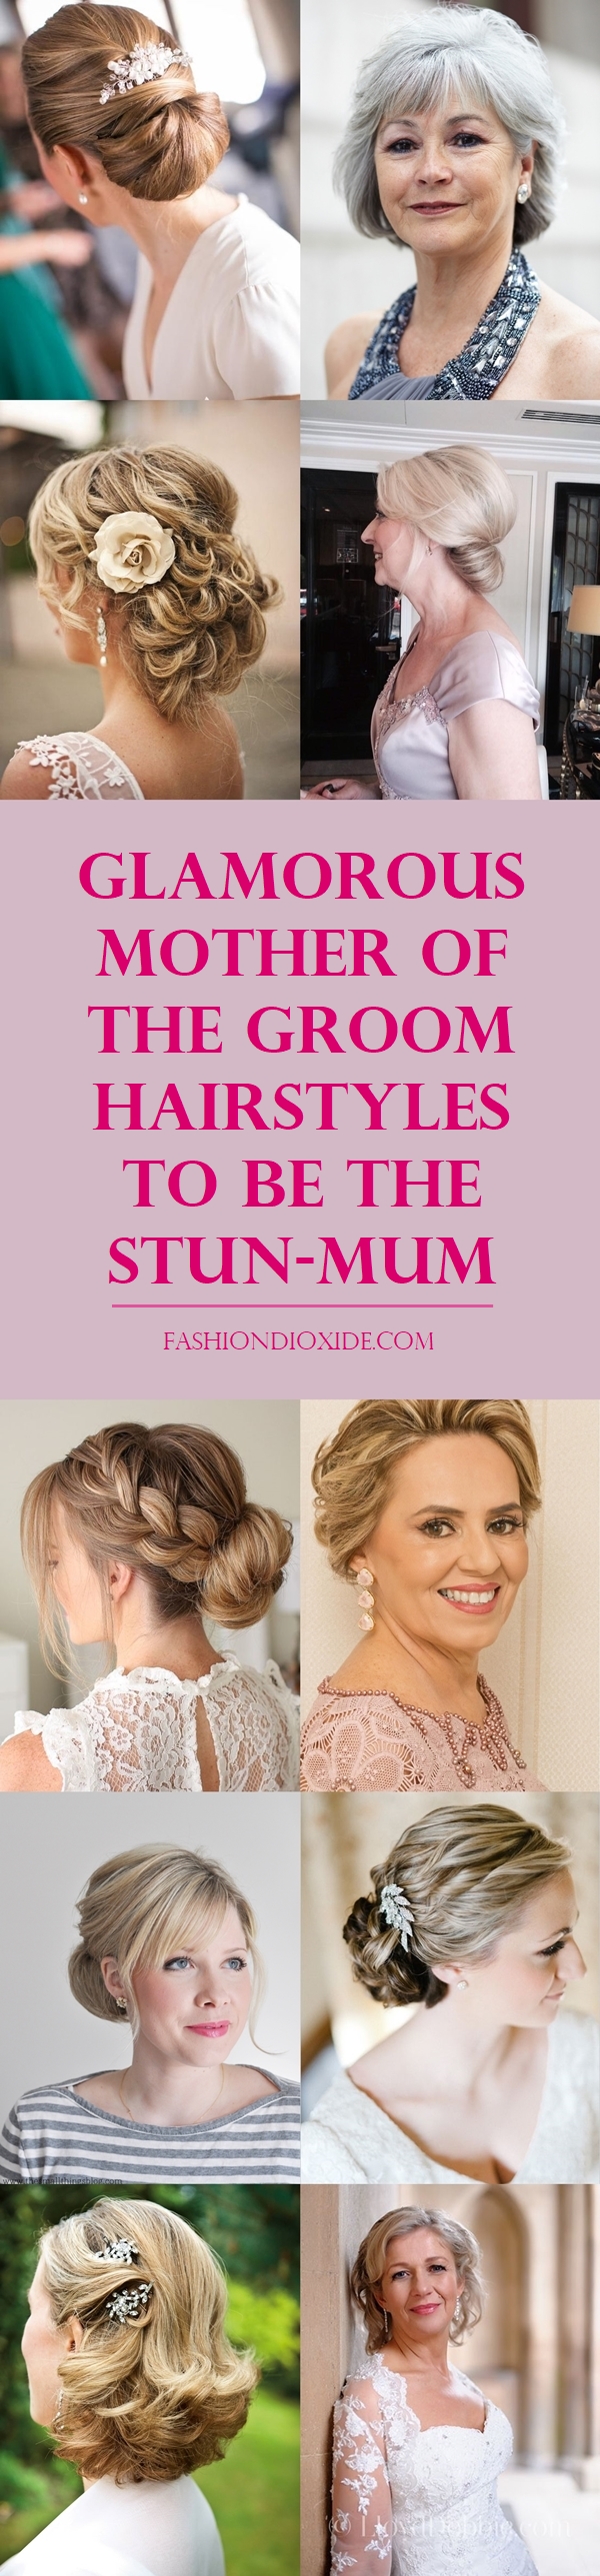 glamorous-mother-of-the-groom-hairstyles-to-be-the-stun-mum